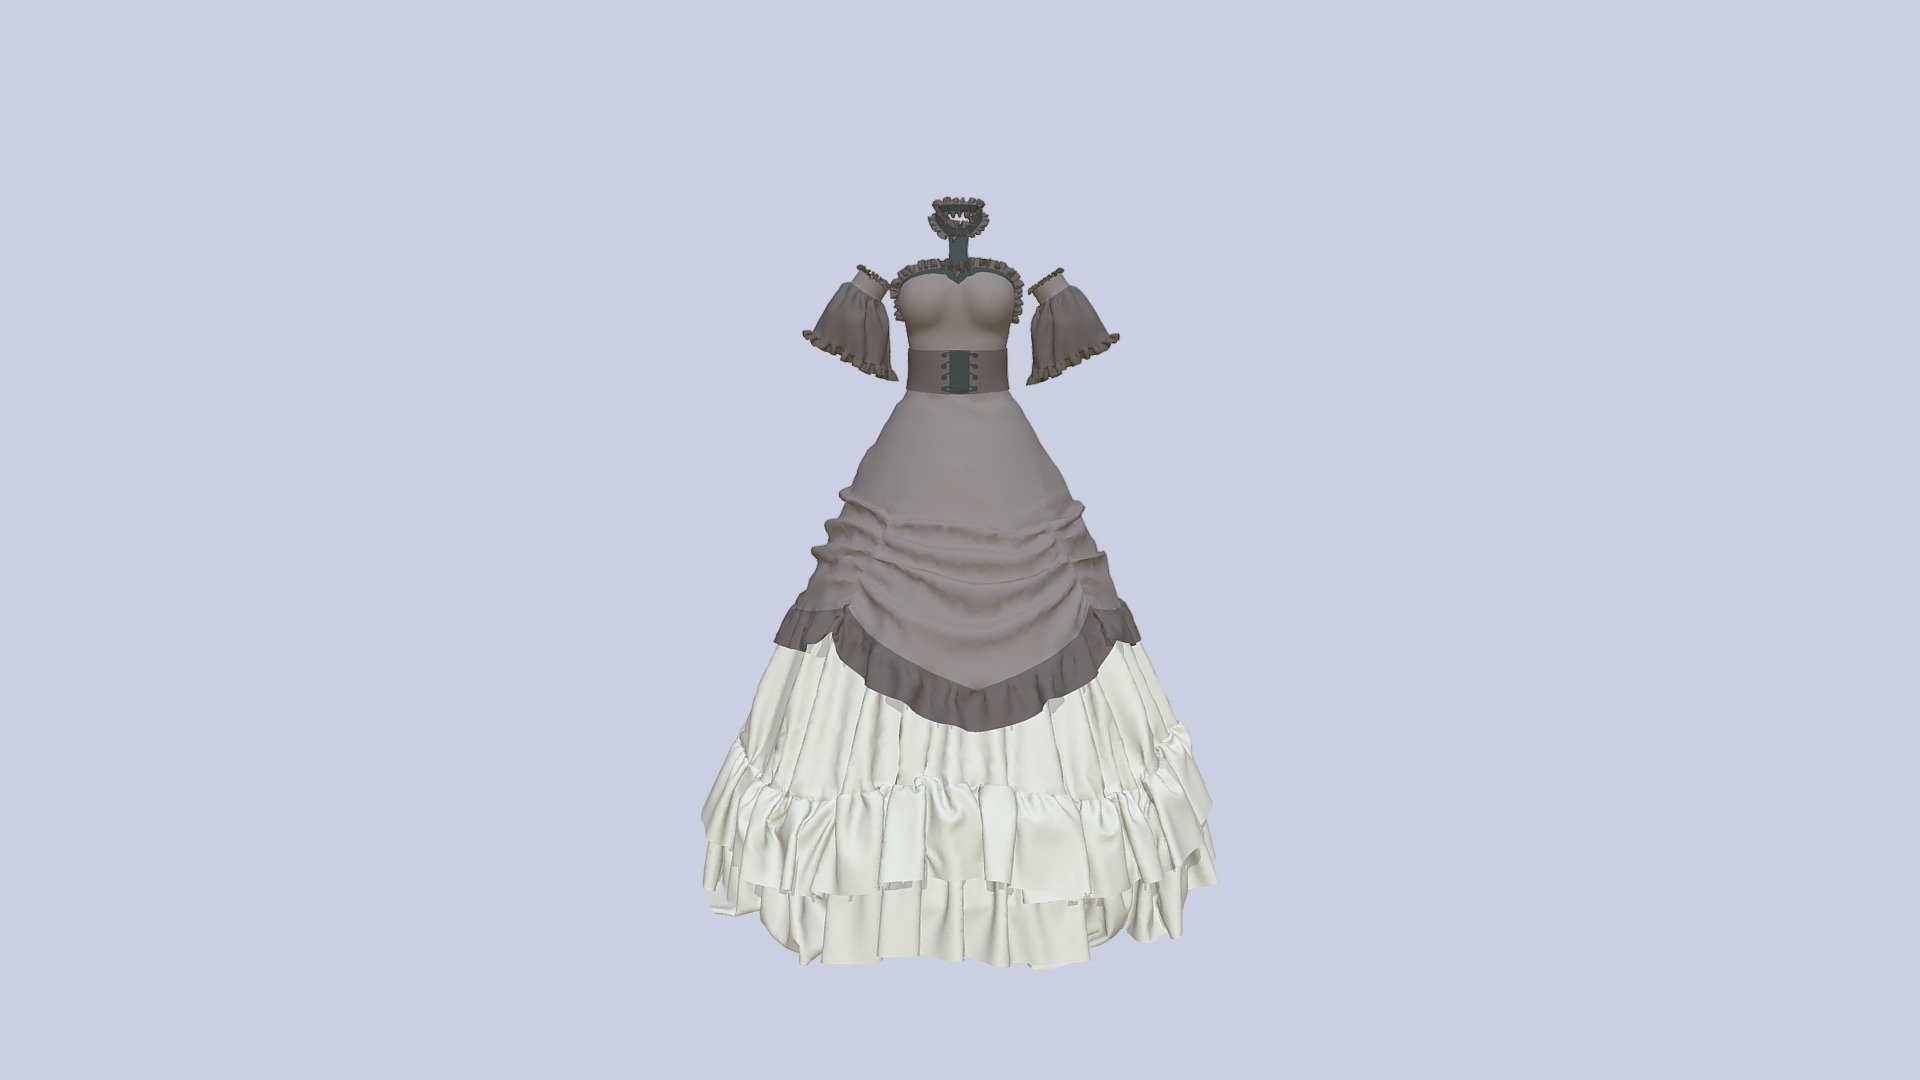 Victorian Dress. For more clothes check my collection: https://sketchfab.com/cmonica3d/collections/clothes

If you have any questions feel free to post a comment! Also if you like the model please leave a review, it helps a lot!

This package includes:

· Model in formats FBX and obj. It is a highpoly mesh without retopology. Two variants: with welded points and unwelded. Welded is a mesh without thickness with merged vertices, unwelded is a mesh with thickness and not merged vertices.

· It does not have textures, only planar colors.

Note: Sketchfab has two-sided rendering, make sure to check this option in your program to get the same result 3d model